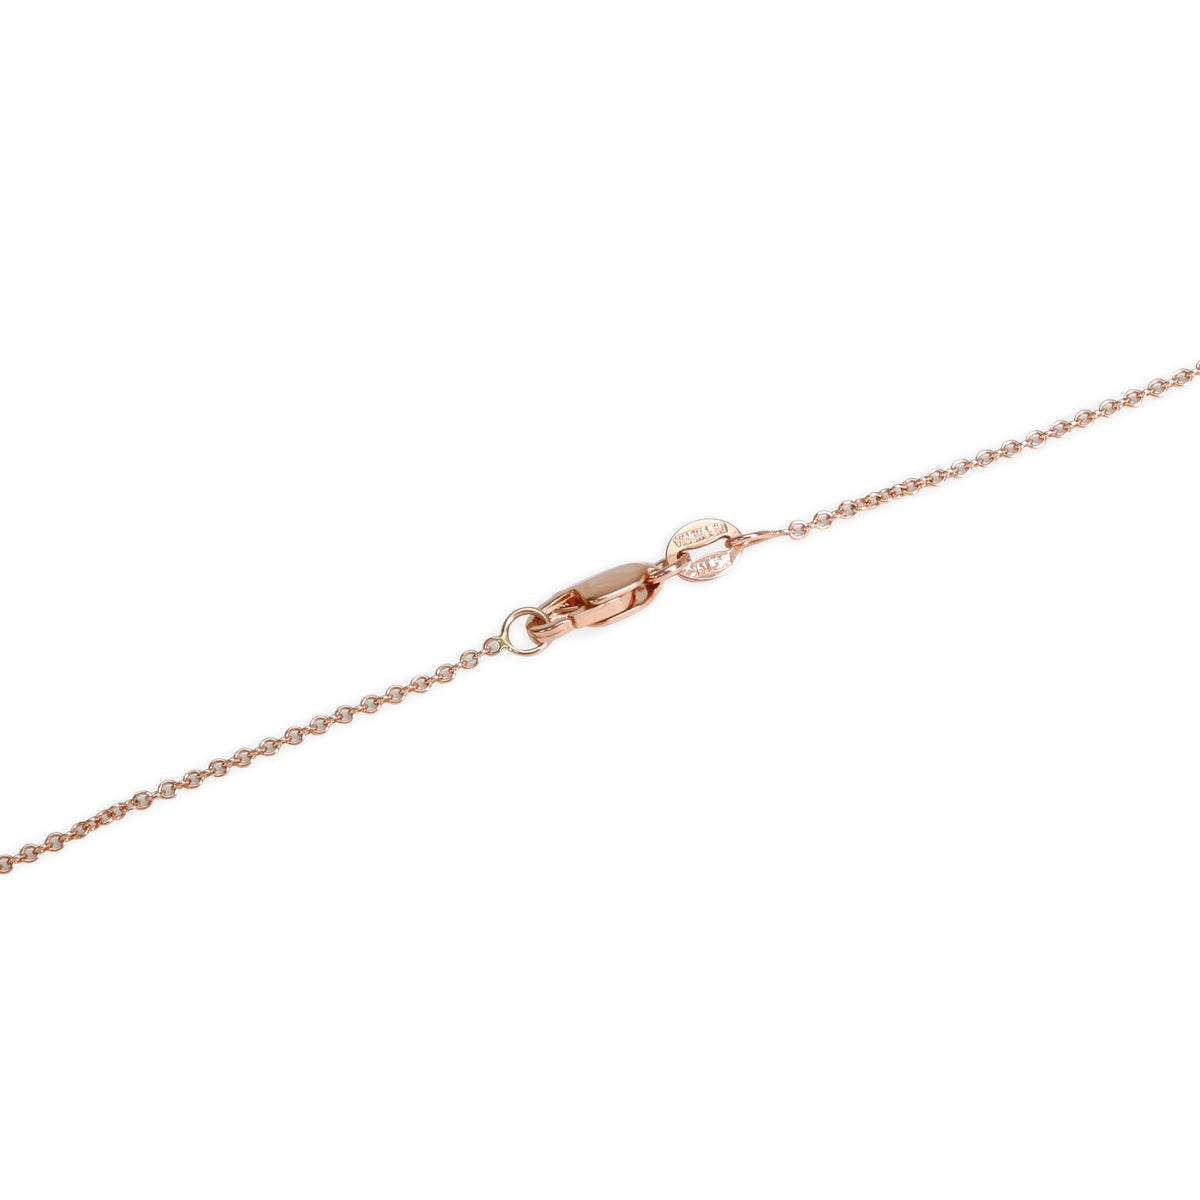 Nicole Rose Articulated Feather Diamond Necklace in 18K Rose Gold 0.44 CTW